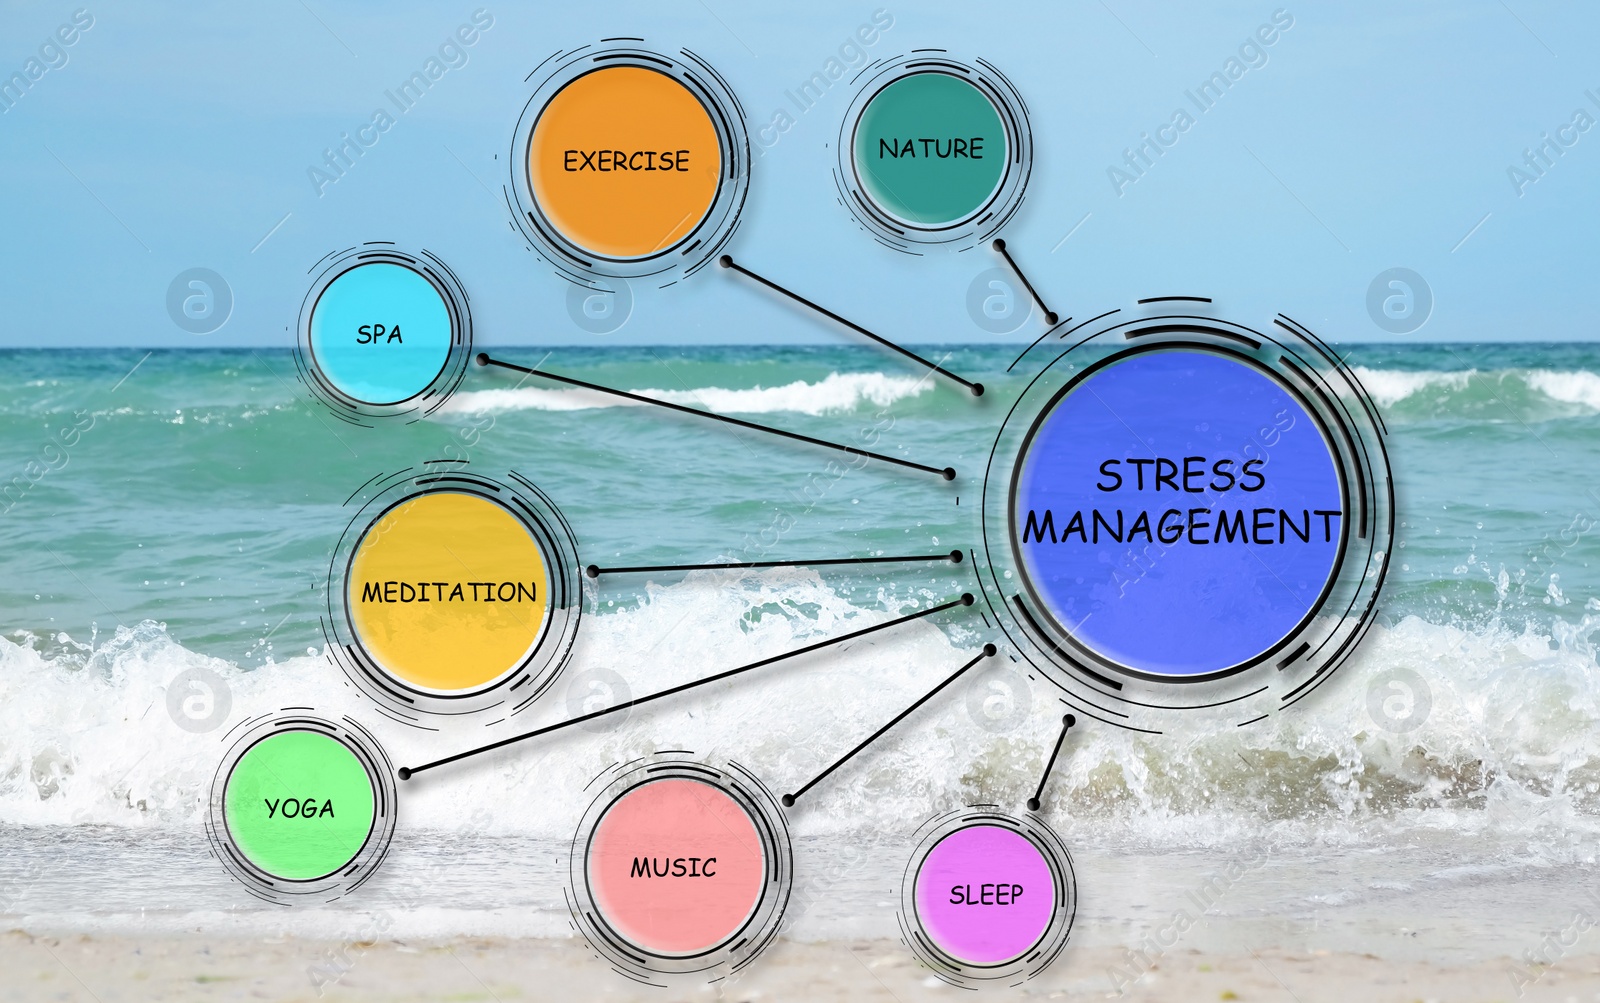 Image of Stress management techniques scheme and seascape on background